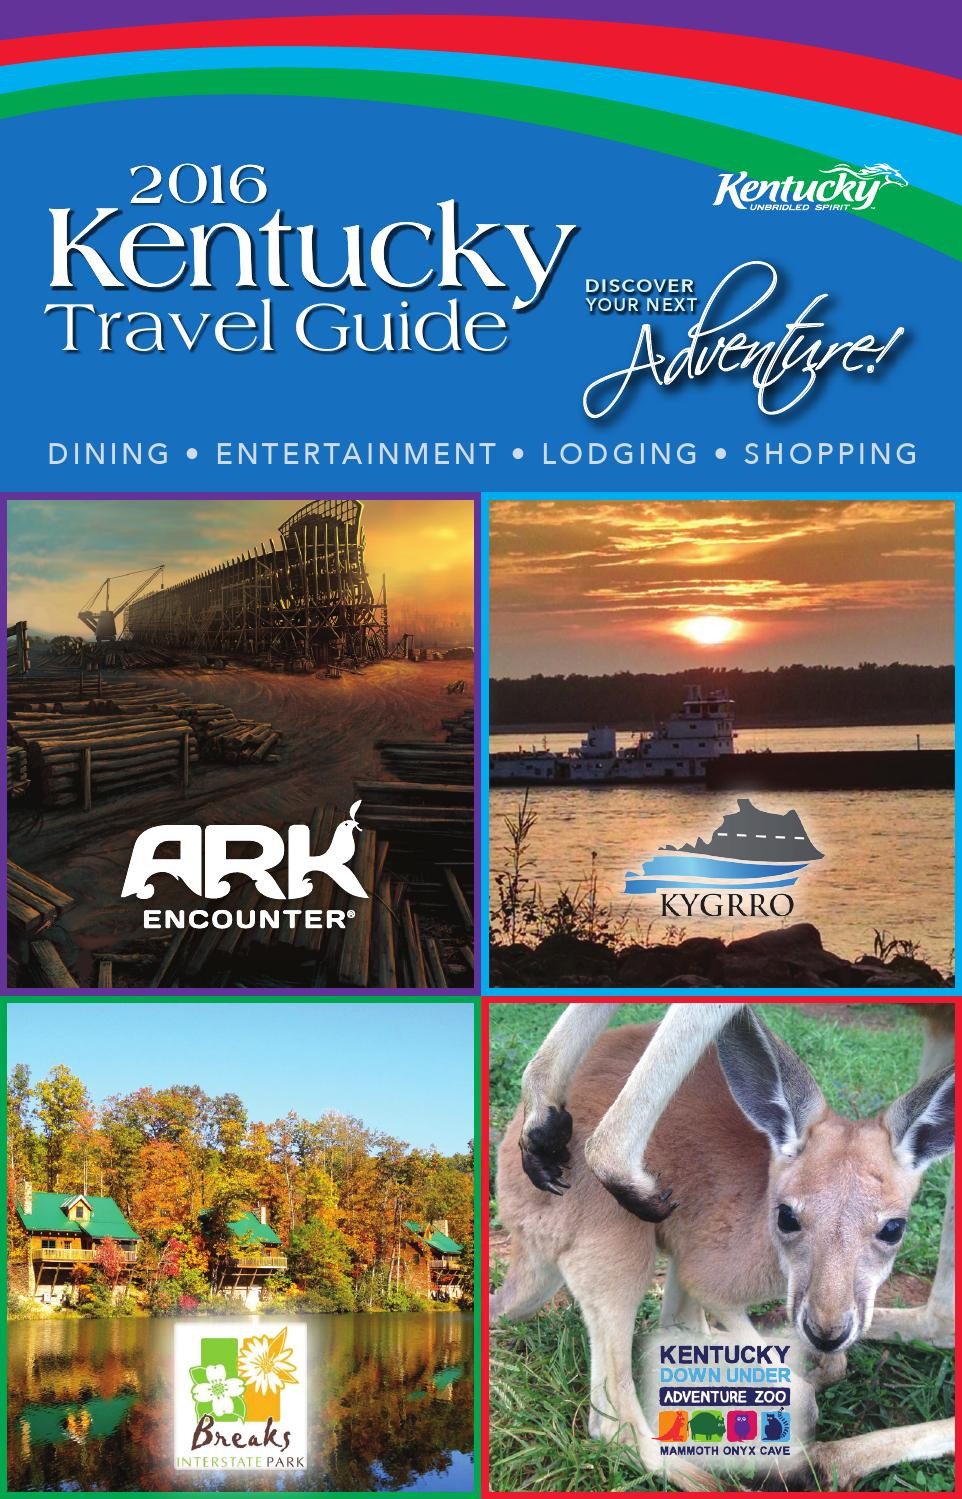 14 Stylish southern Kentucky Hardwood Flooring Gamaliel Ky 2024 free download southern kentucky hardwood flooring gamaliel ky of 2016 kentucky travel guide by kentucky travel guide issuu for page 1